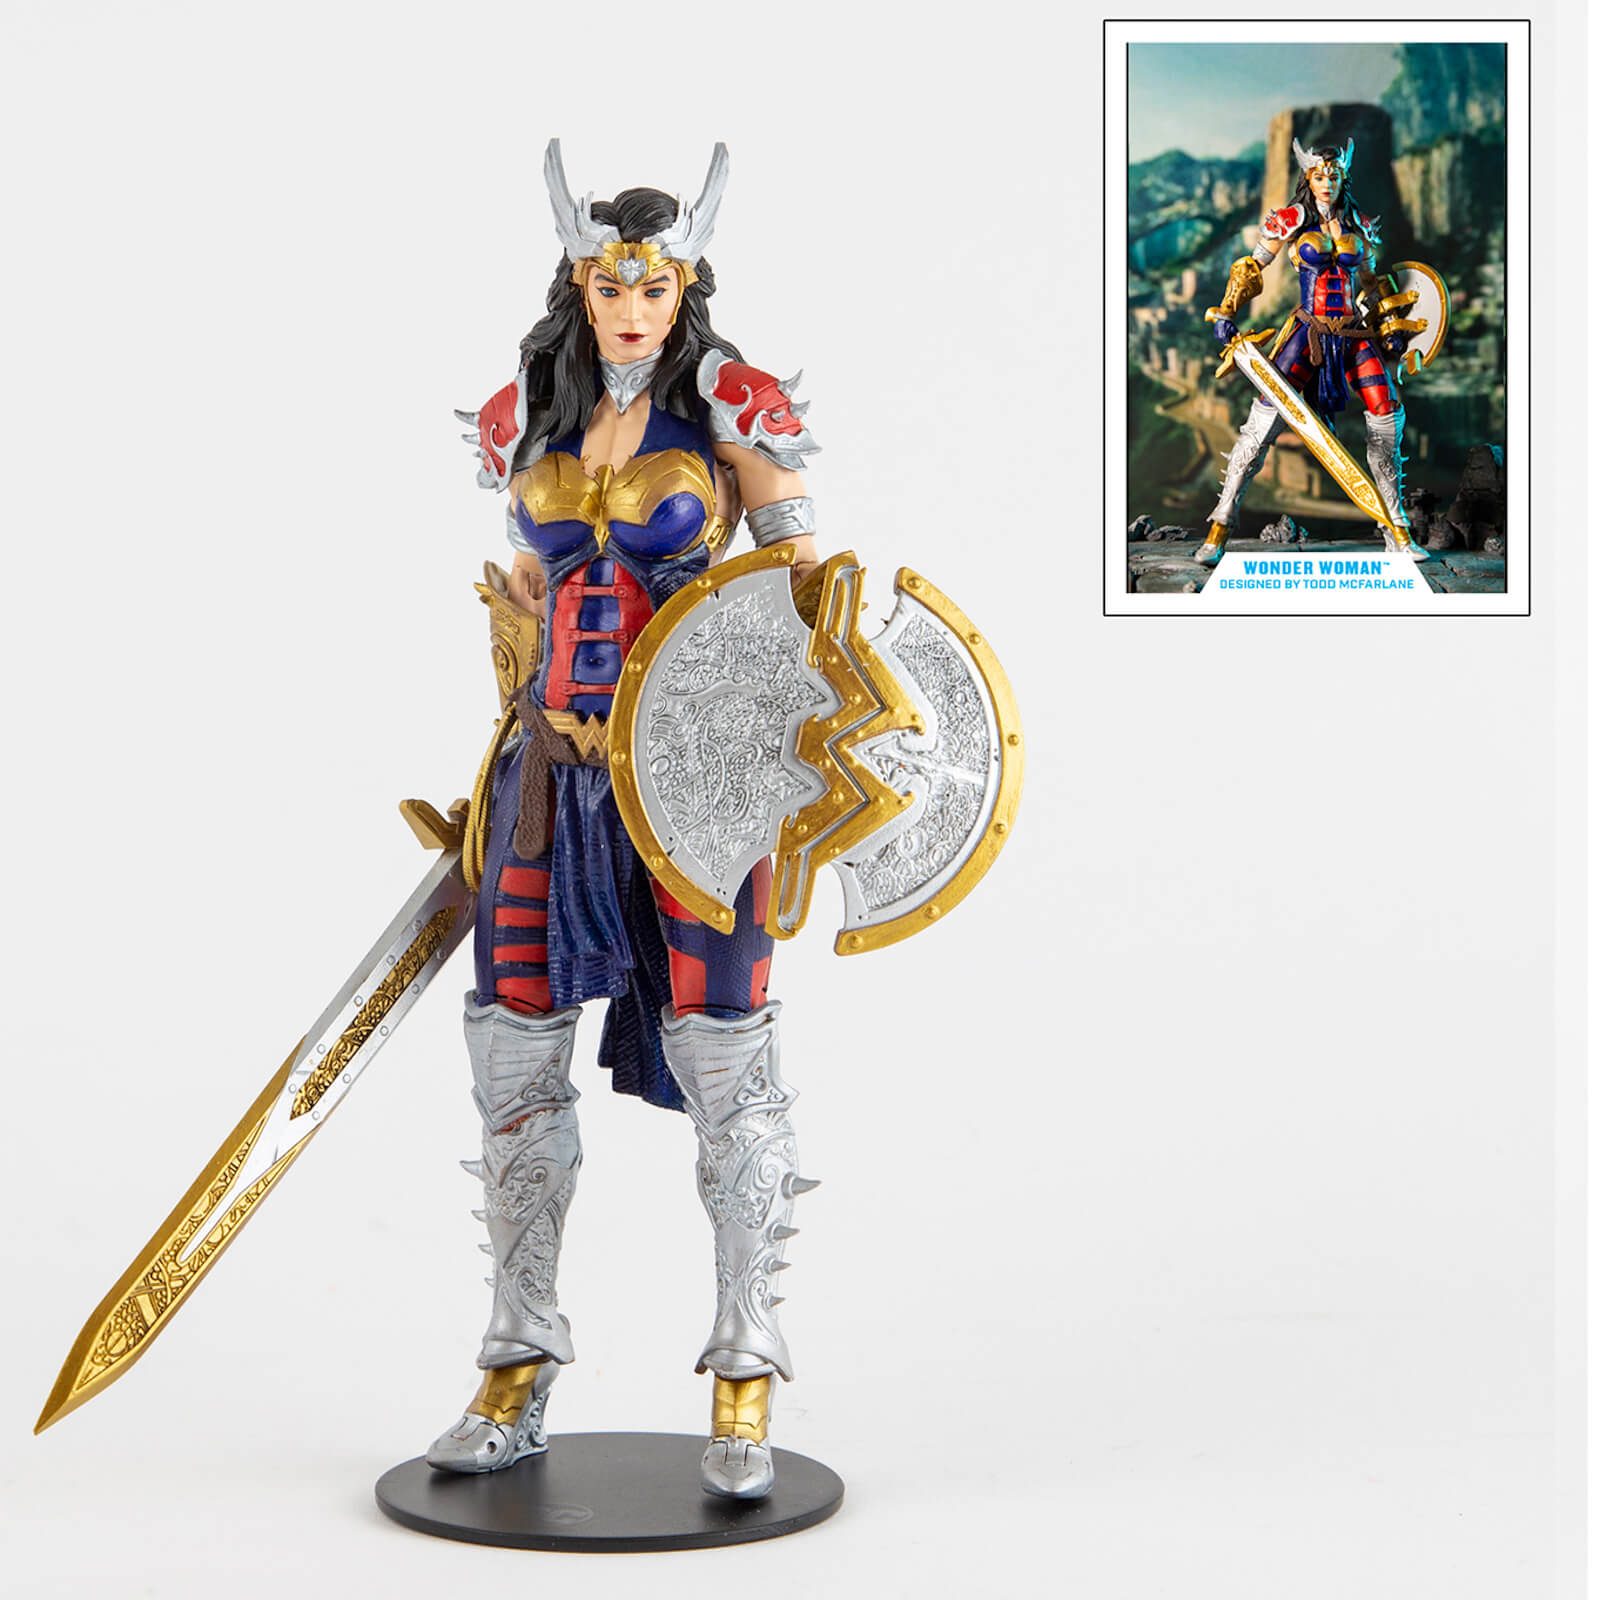 Image of McFarlane DC Multiverse 7 Inch - Wonder Woman Designed By Todd Mcfarlane Action Figure